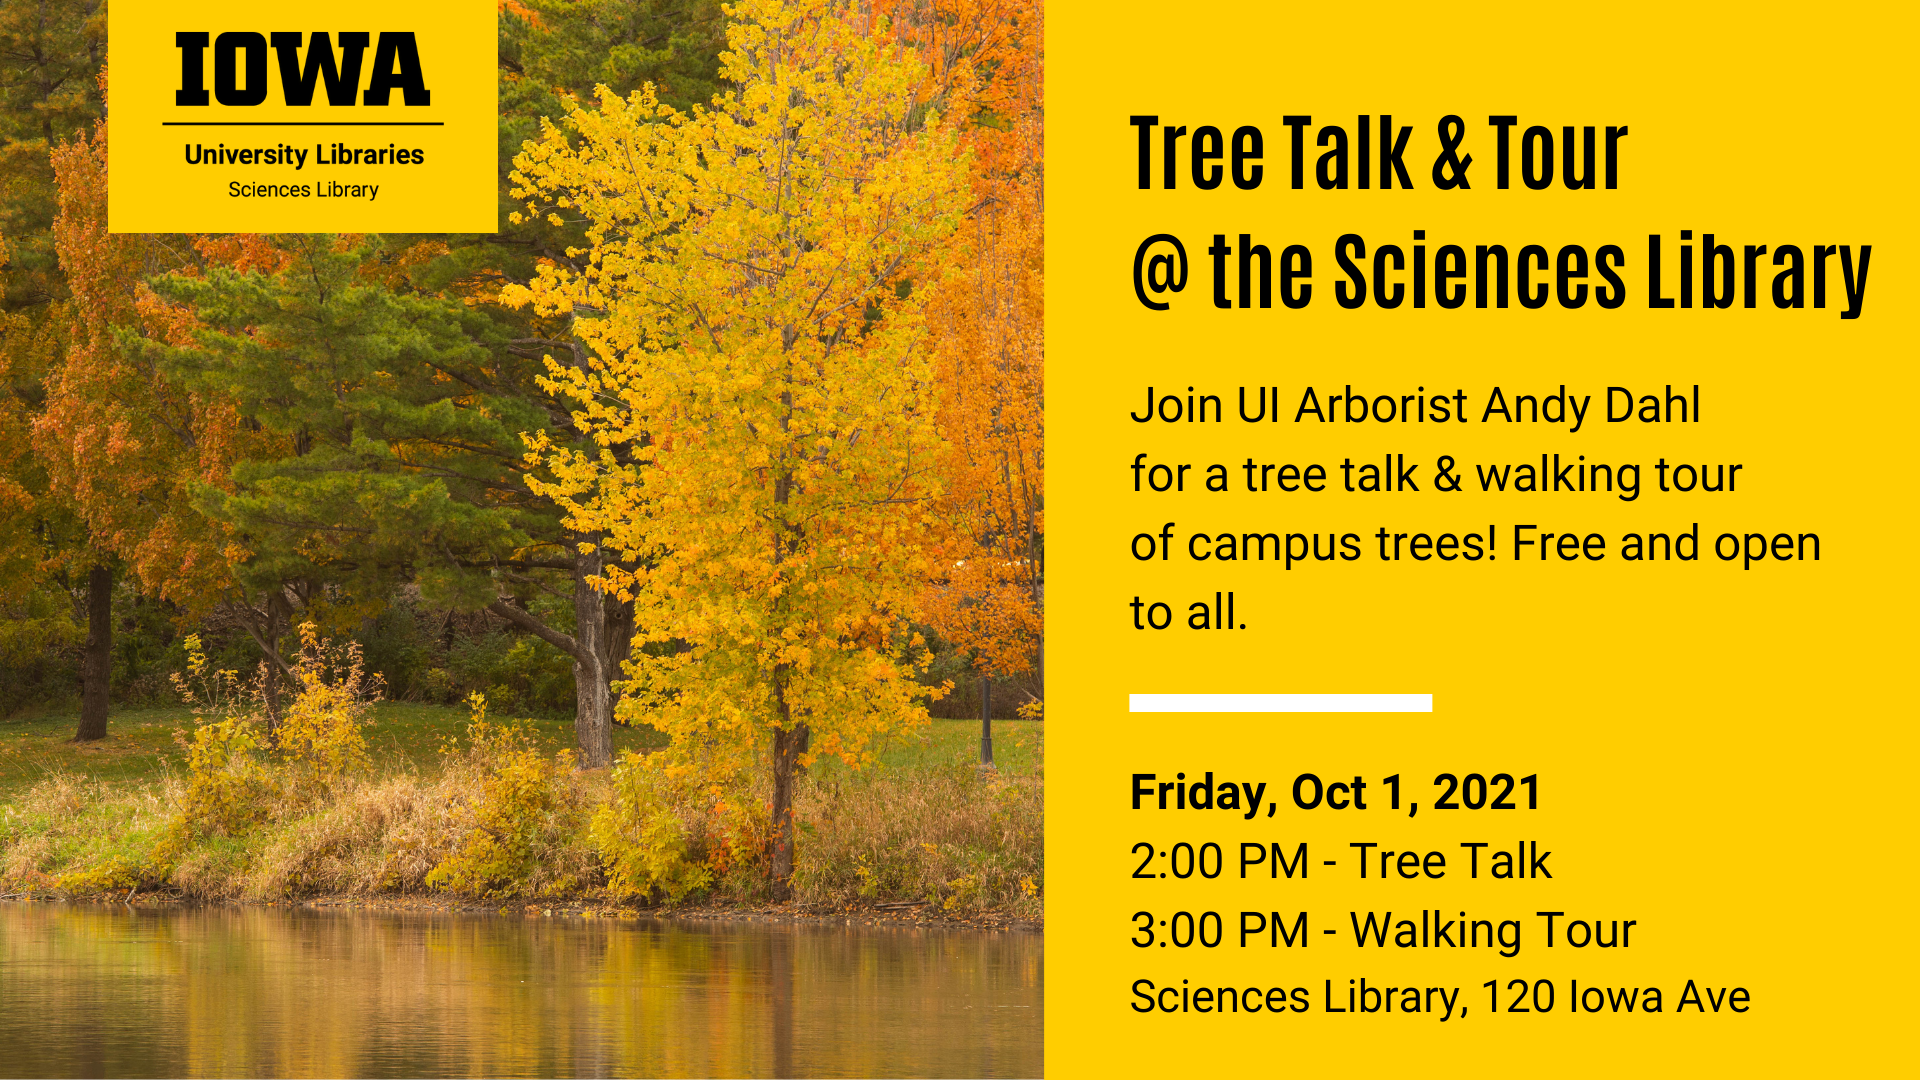 Tree Talk & Tour at the Sciences Library with Andy Dahl